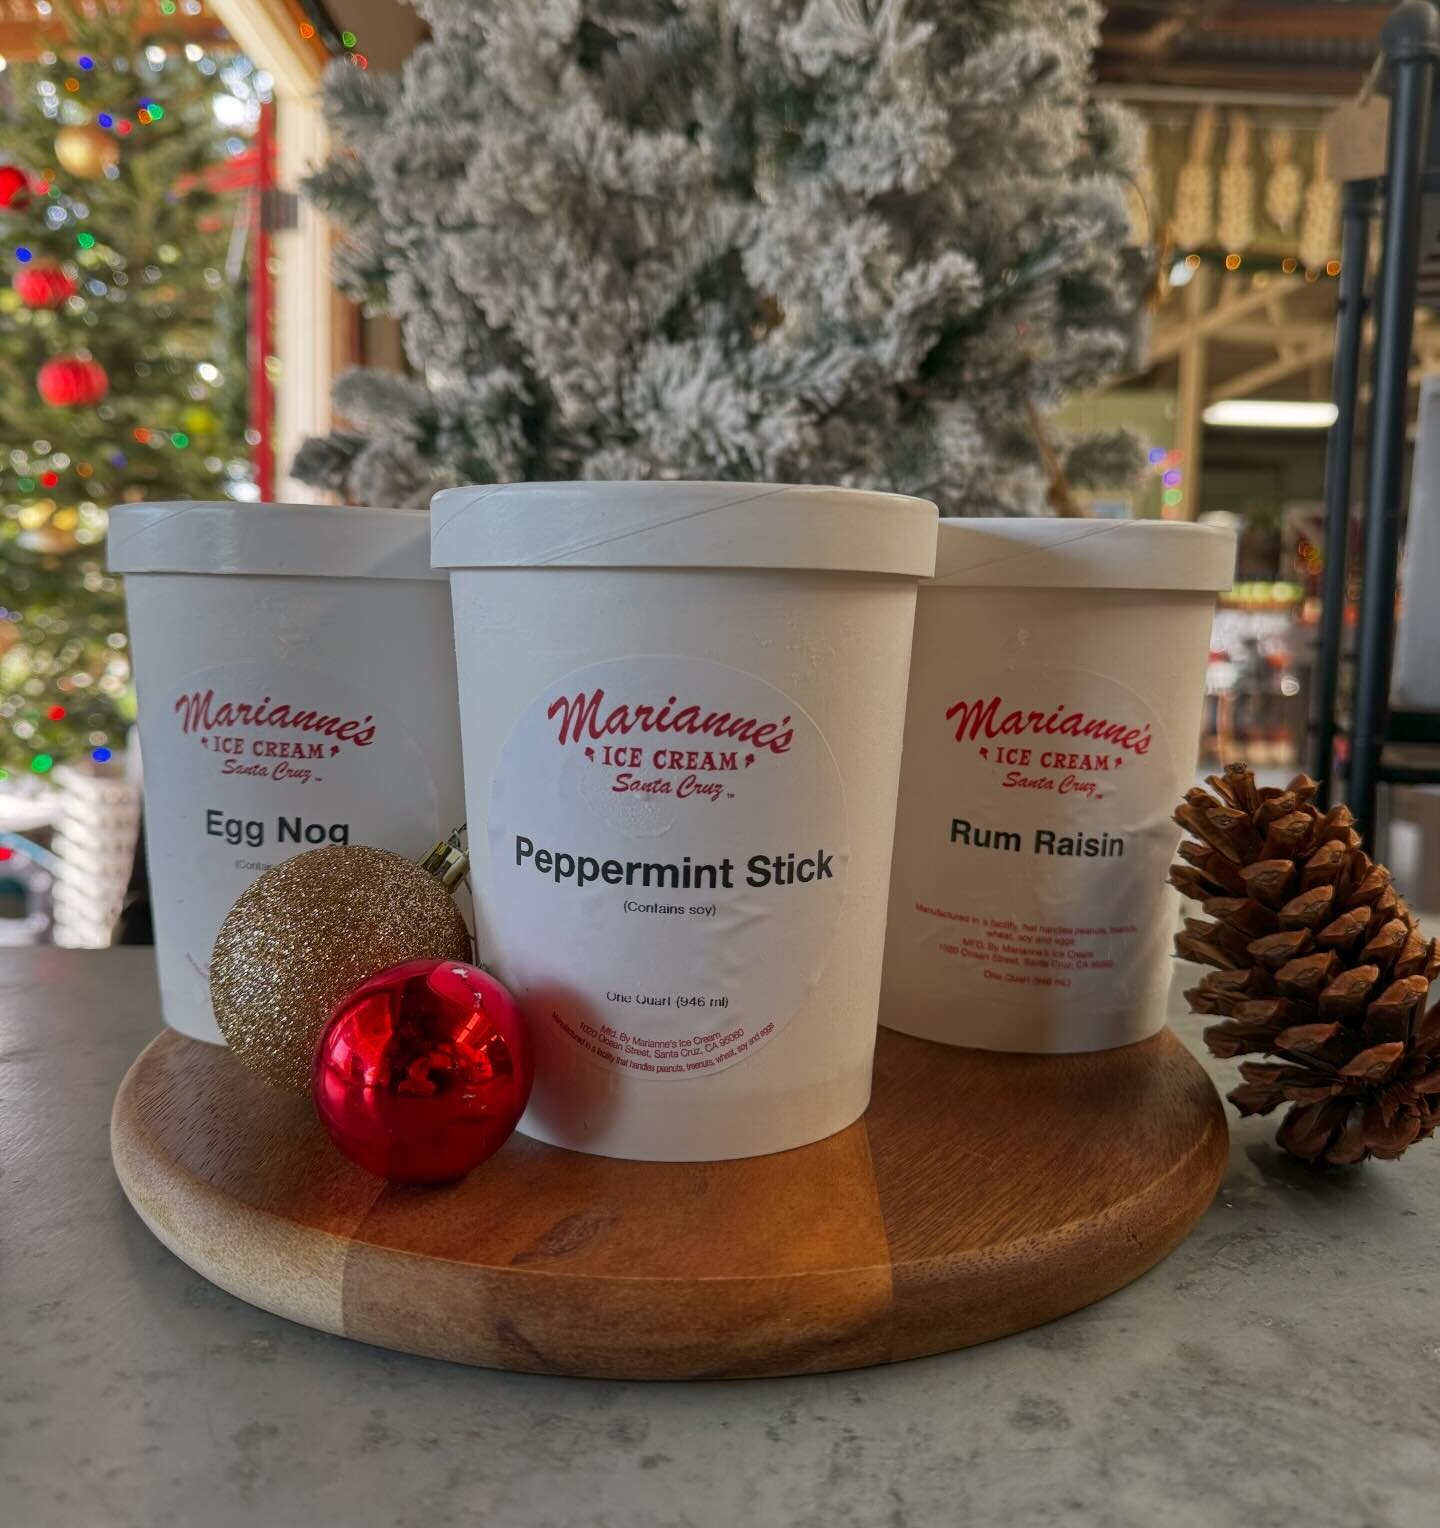 Winter ice cream flavors are now in stock! Be sure to get a pint for yourself.